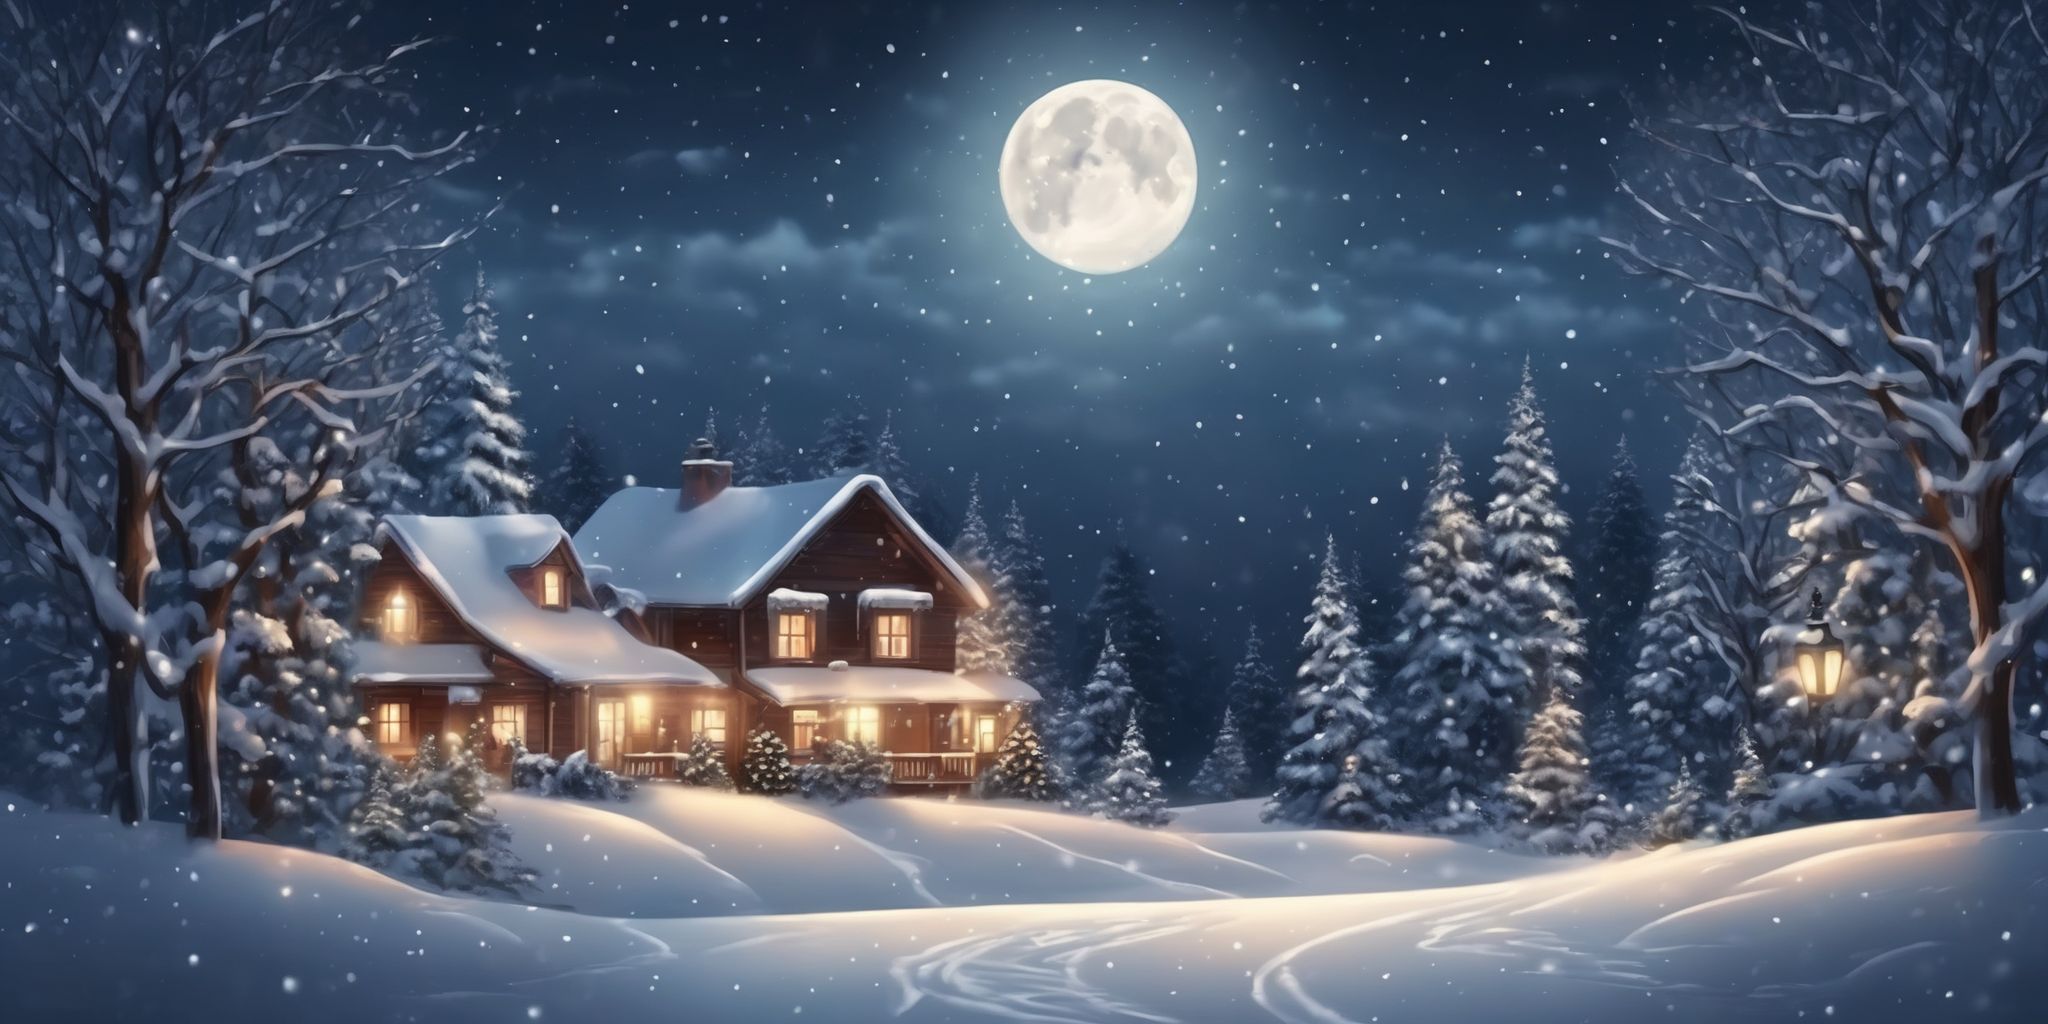 Moonlight in realistic Christmas style